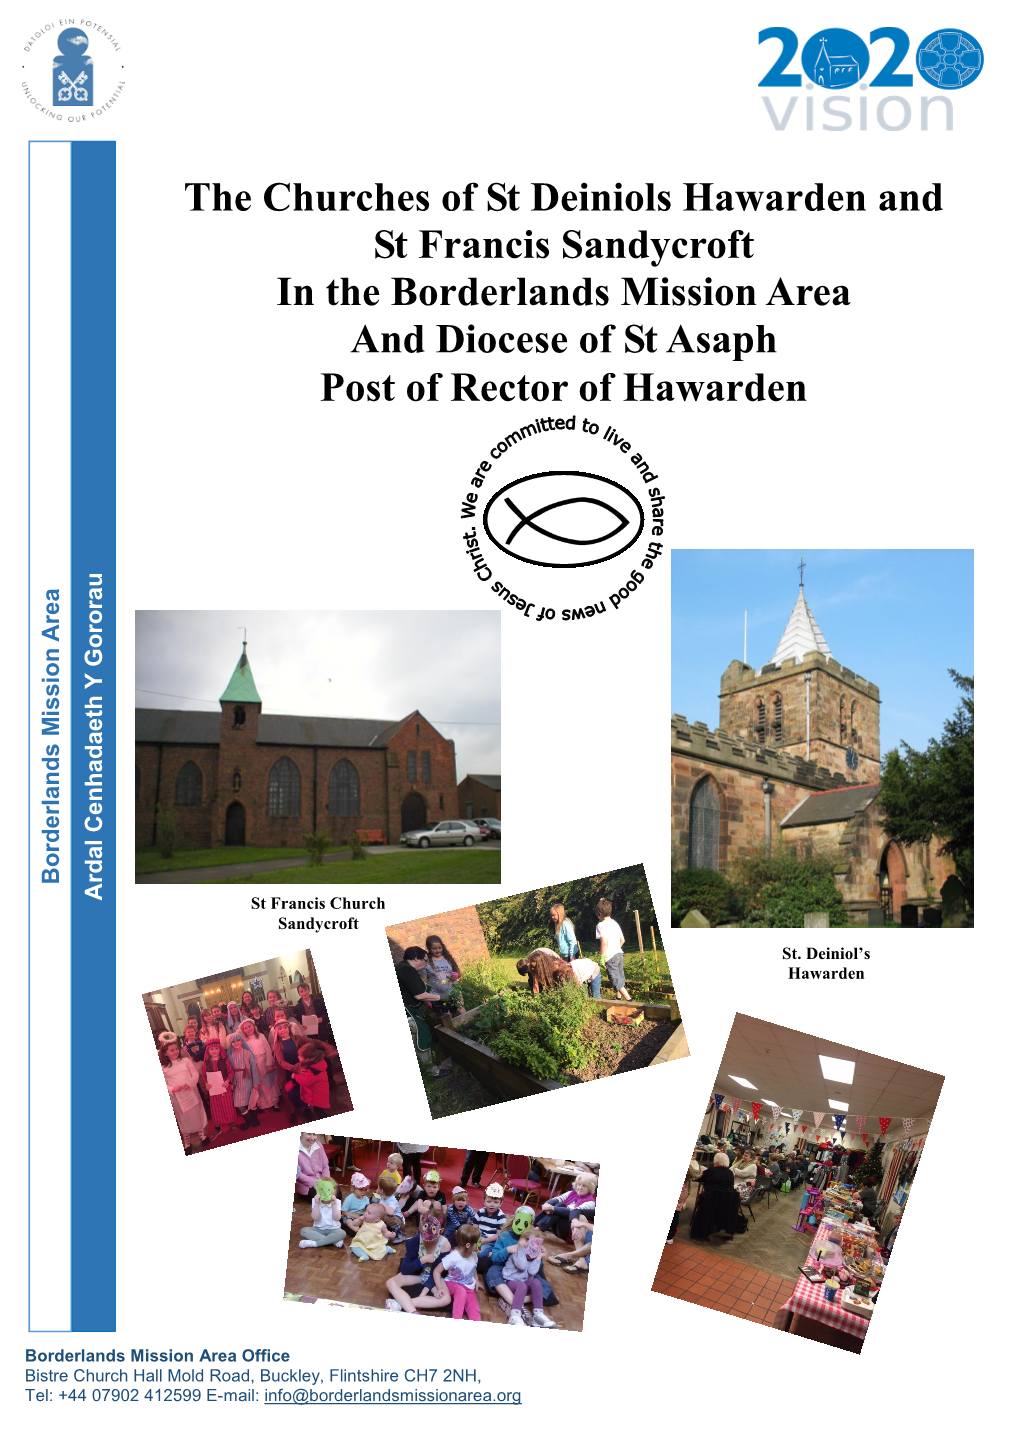 The Churches of St Deiniols Hawarden and St Francis Sandycroft in the Borderlands Mission Area and Diocese of St Asaph Post of Rector of Hawarden